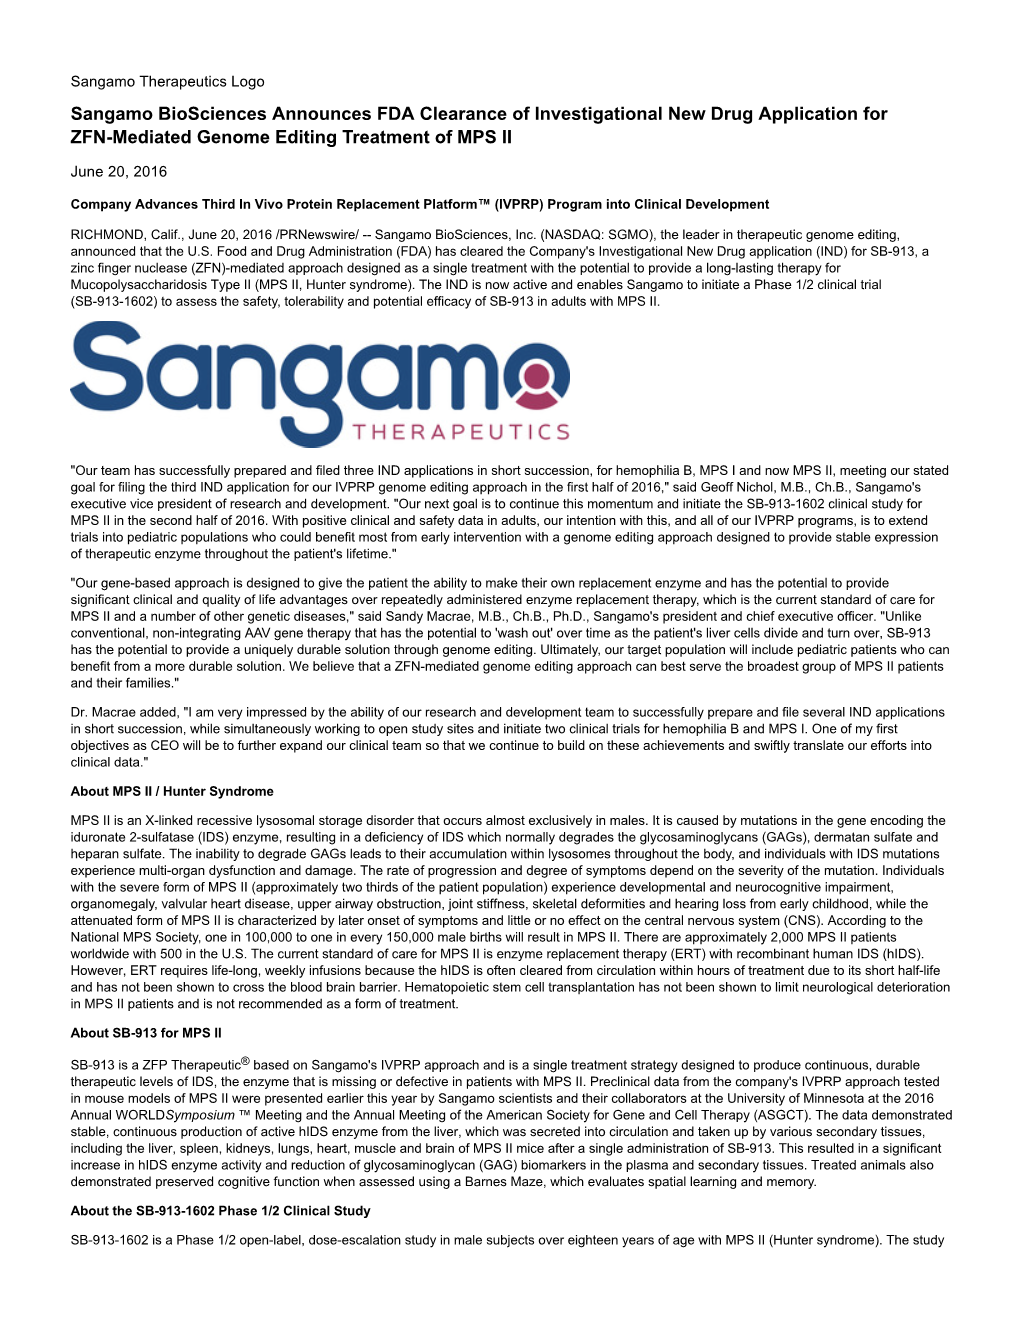 Sangamo Biosciences Announces FDA Clearance of Investigational New Drug Application for ZFN-Mediated Genome Editing Treatment of MPS II